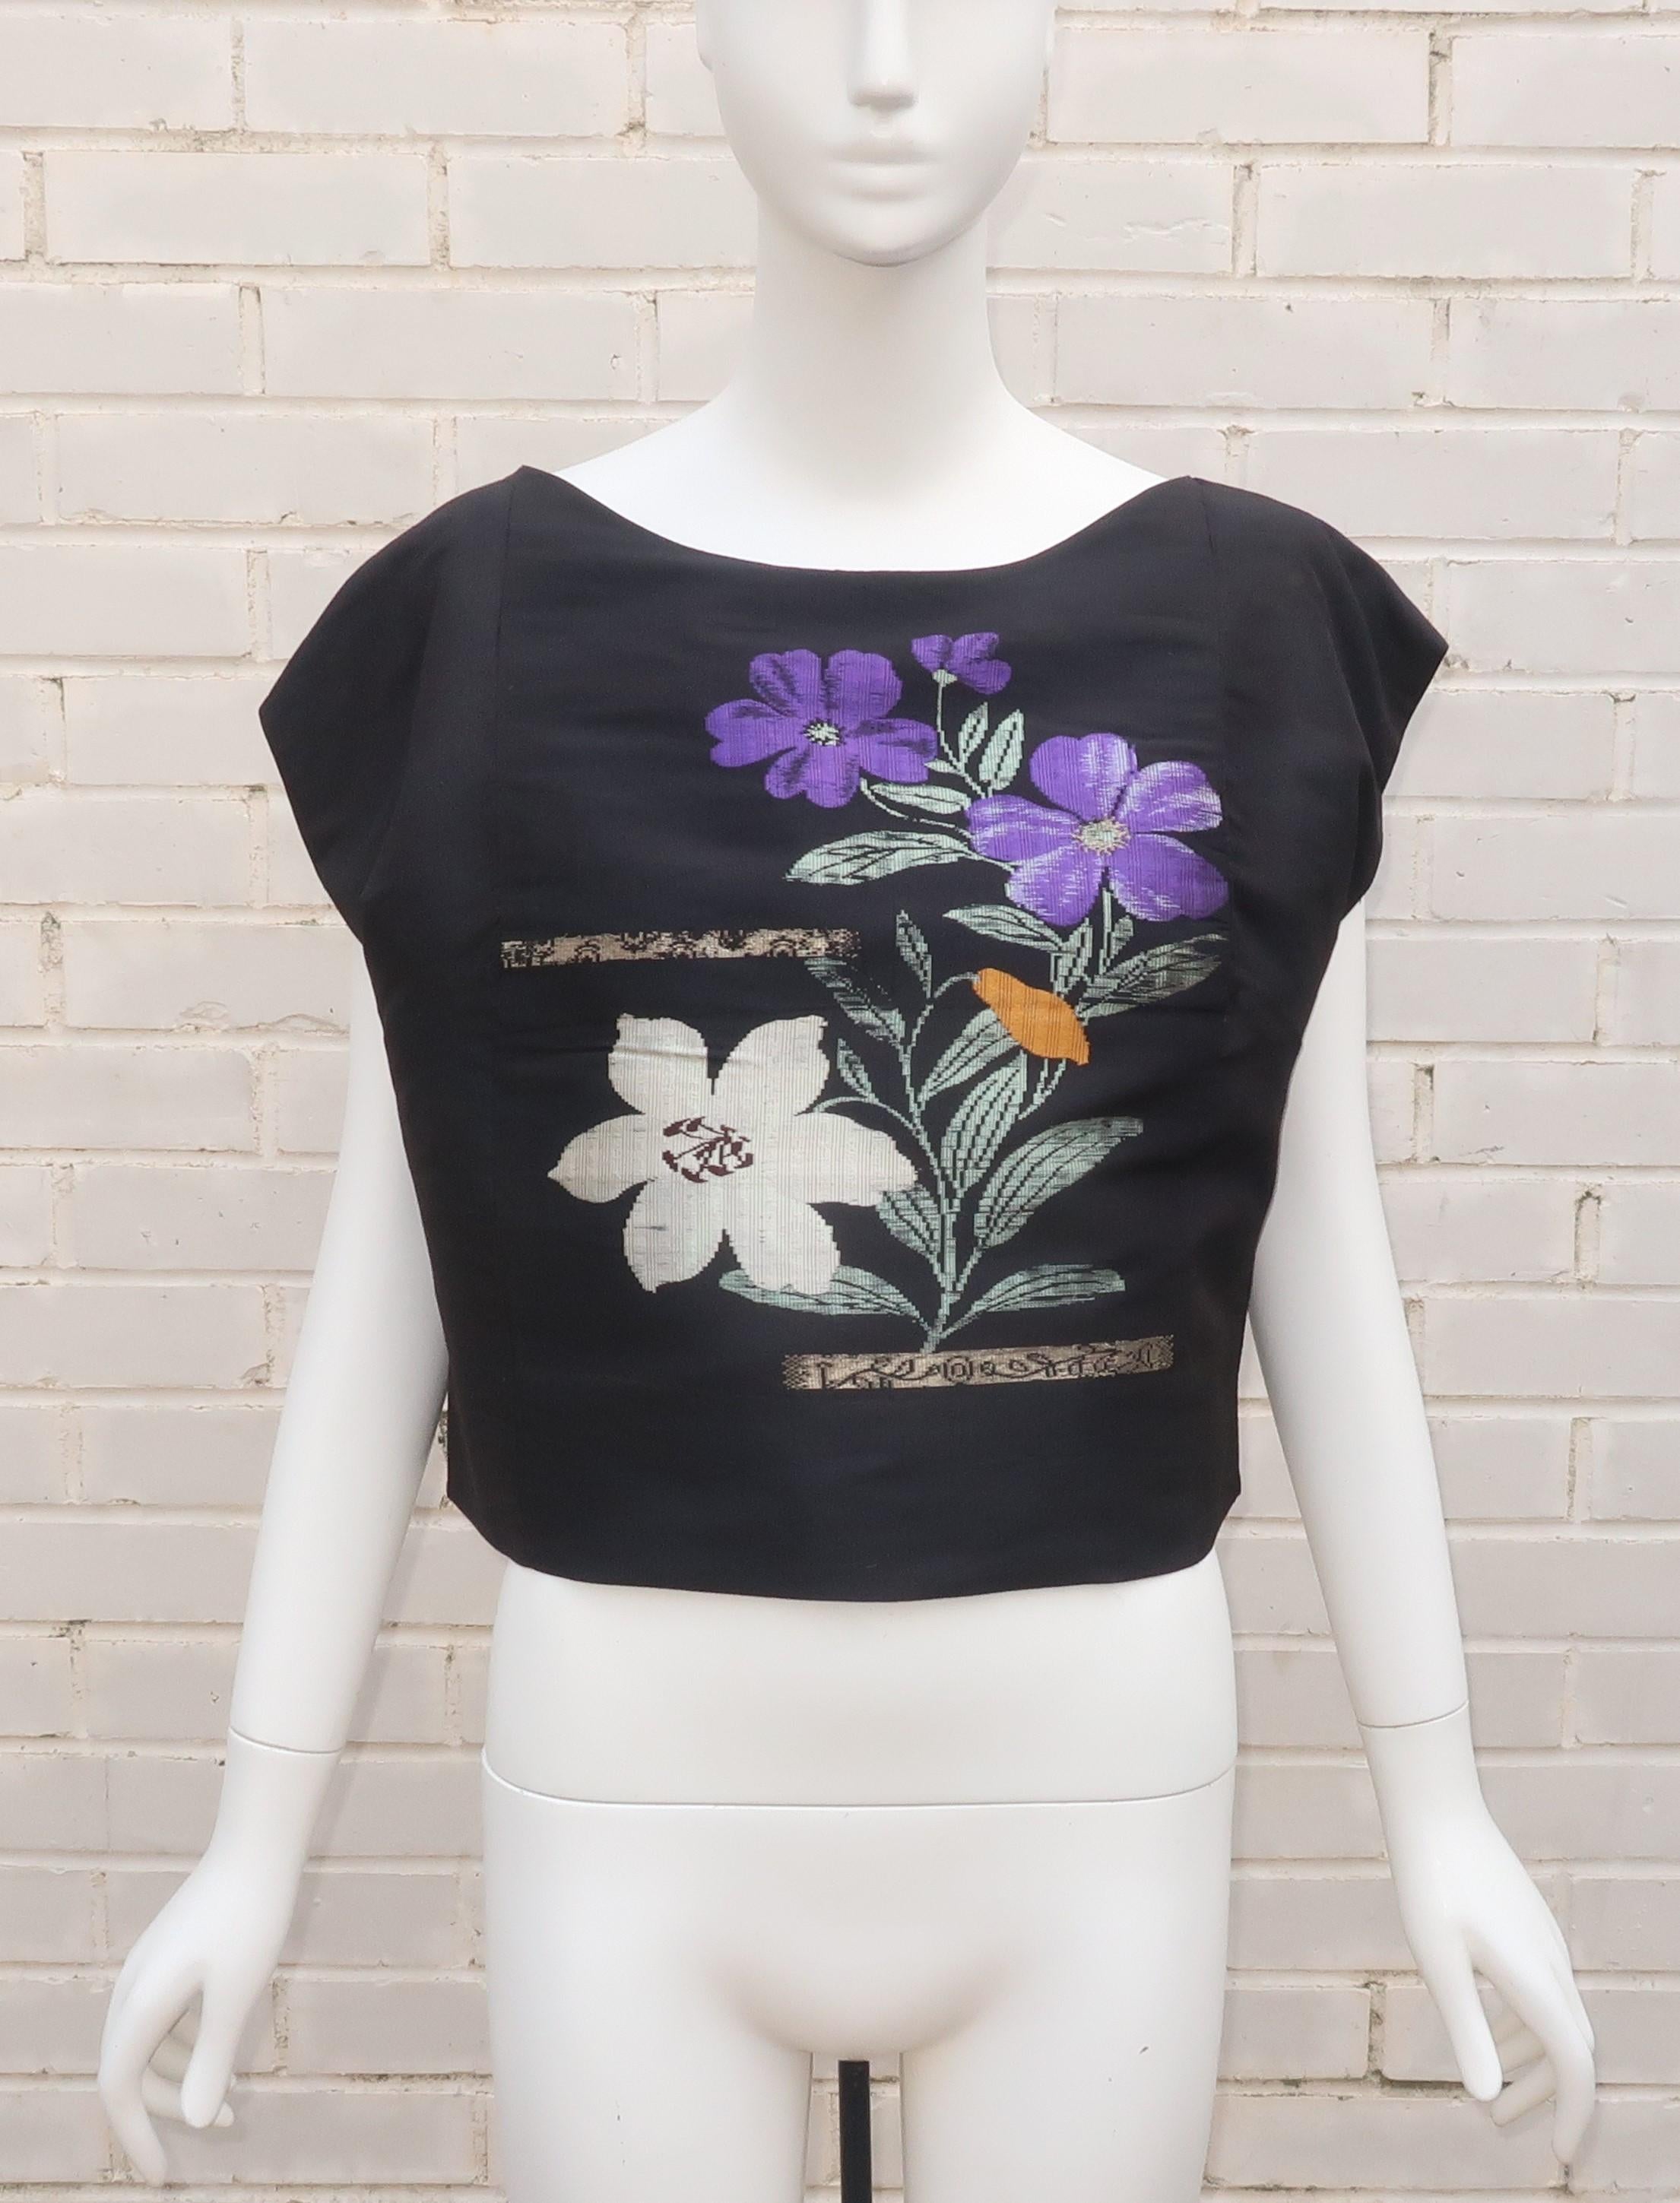 C.1950 cap sleeve black shell style top custom fabricated from a Japanese obi cloth.  The black background is the perfect frame for the rich royal purple, green and matte silver floral design.  The top is simply made with pullover construction and a